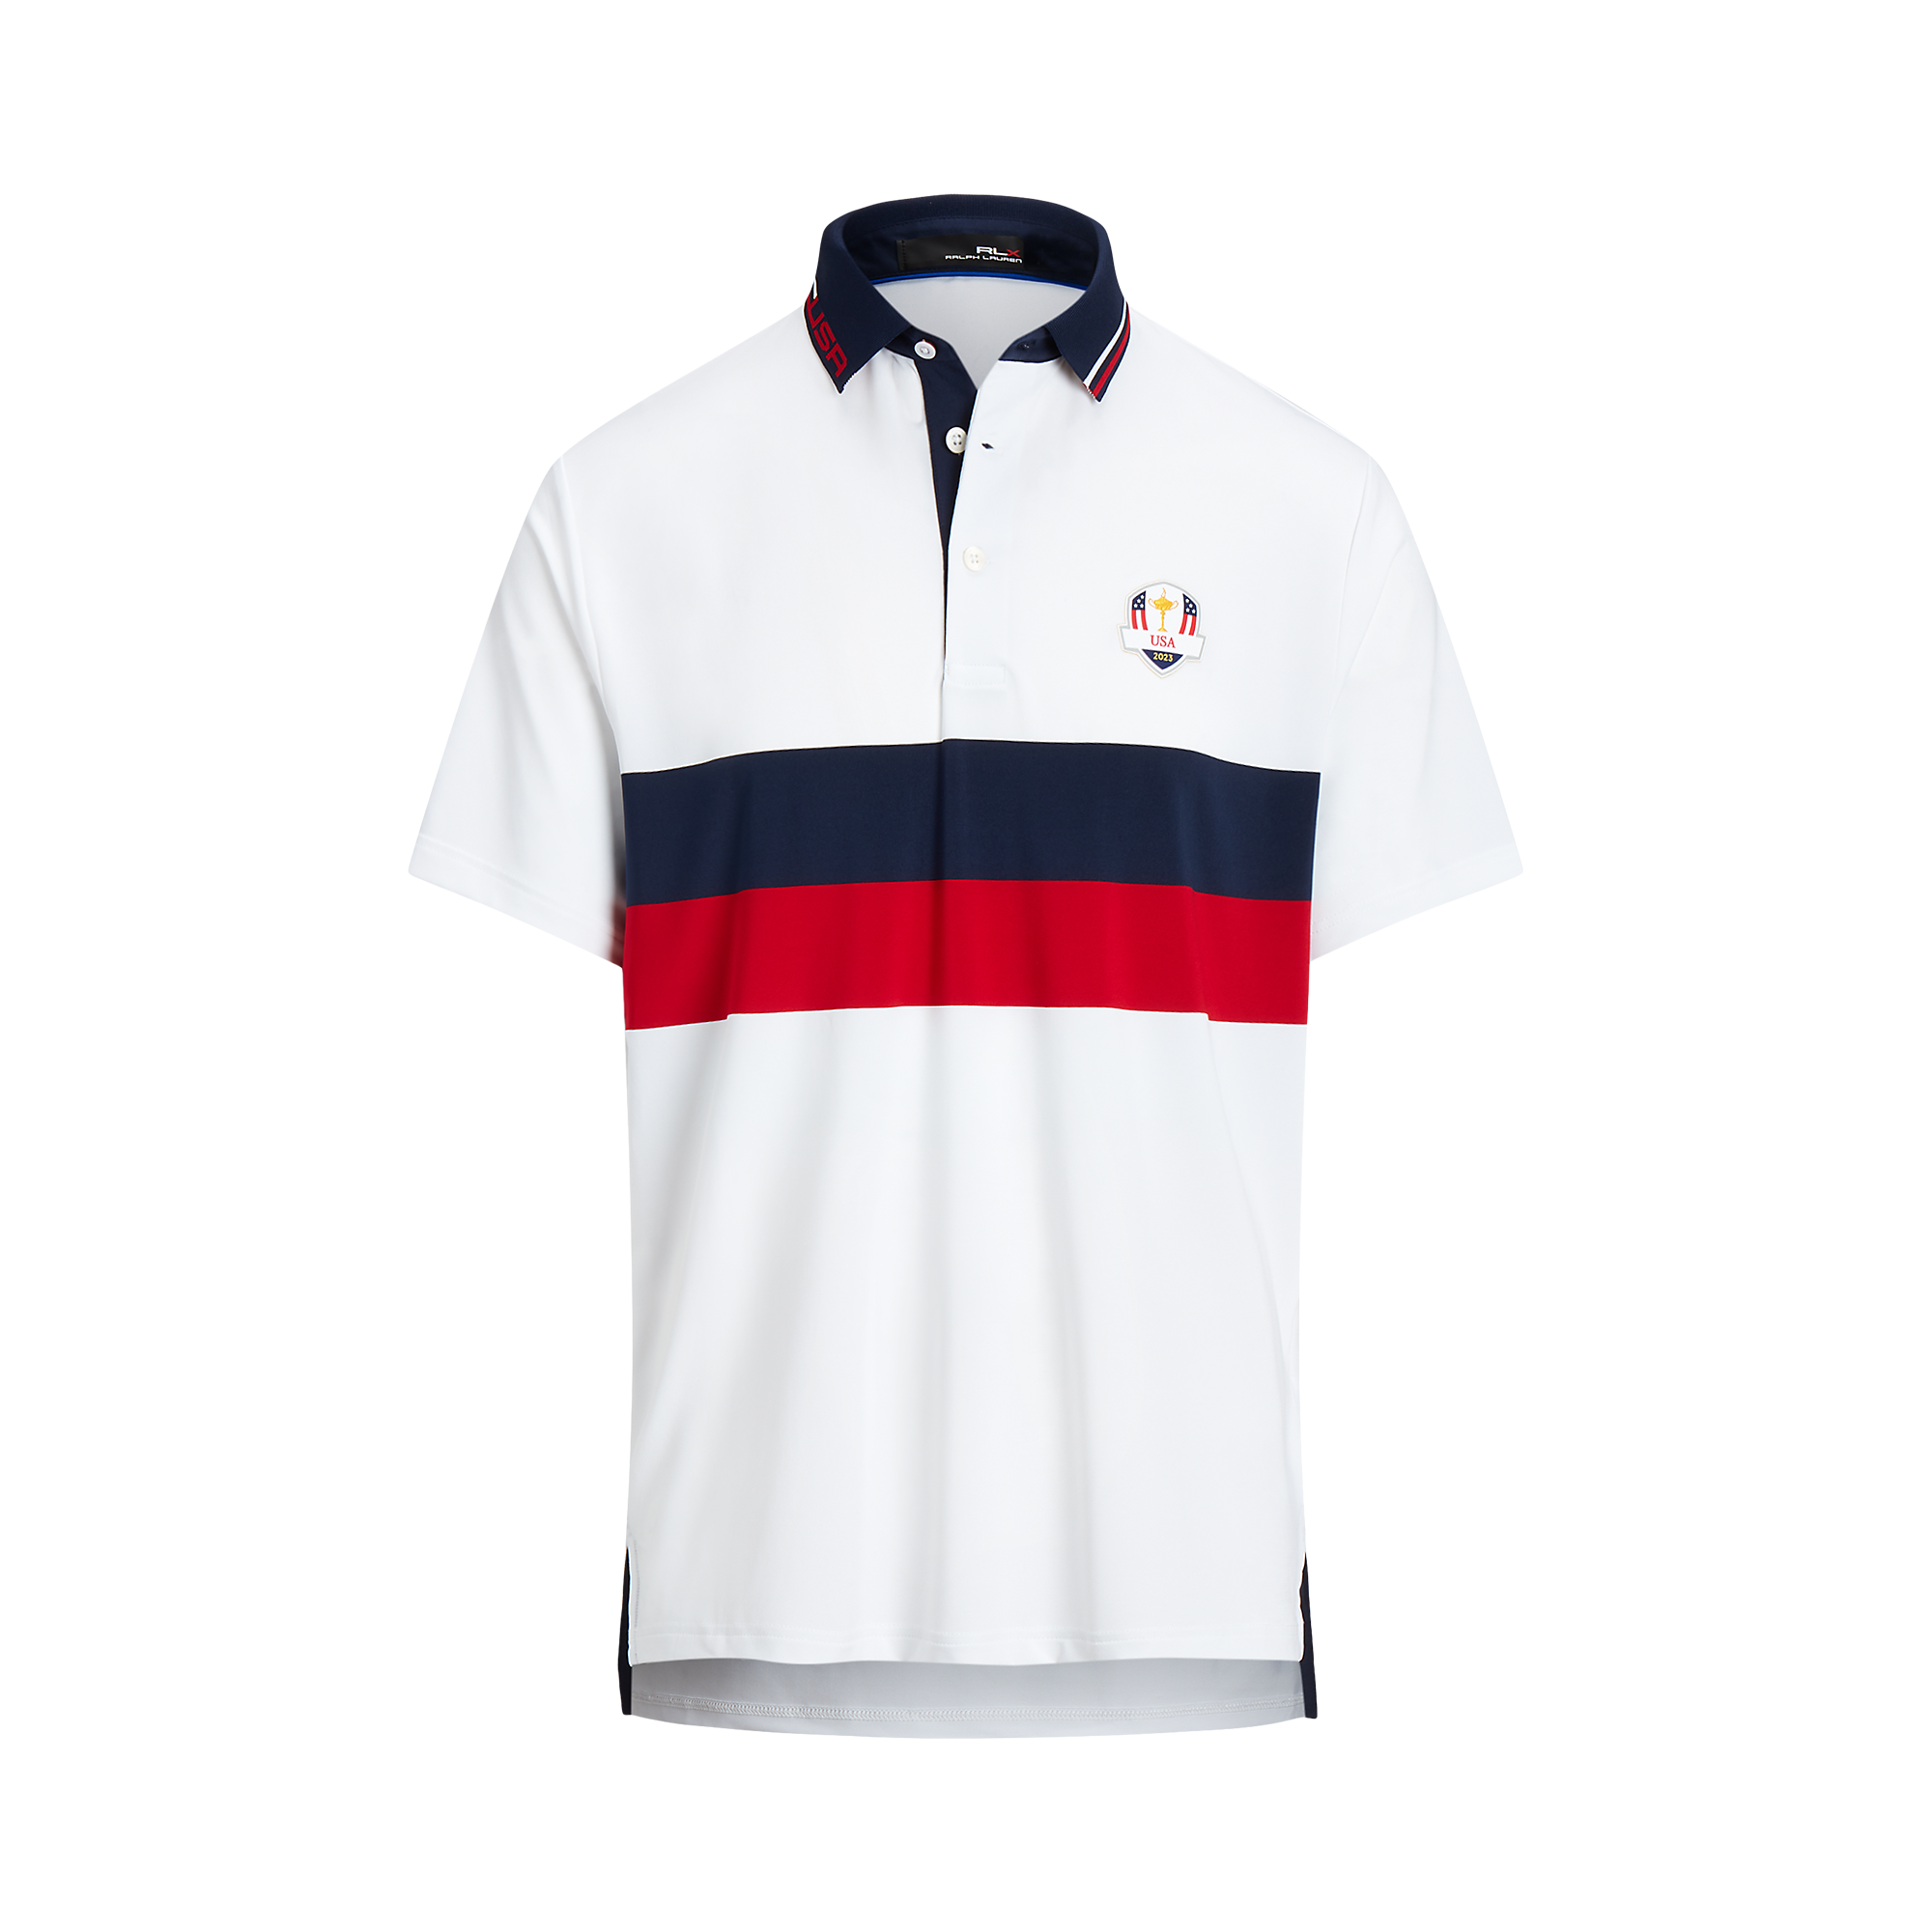 Check out U.S. Ryder Cup team's uniforms, courtesy of Ralph Lauren